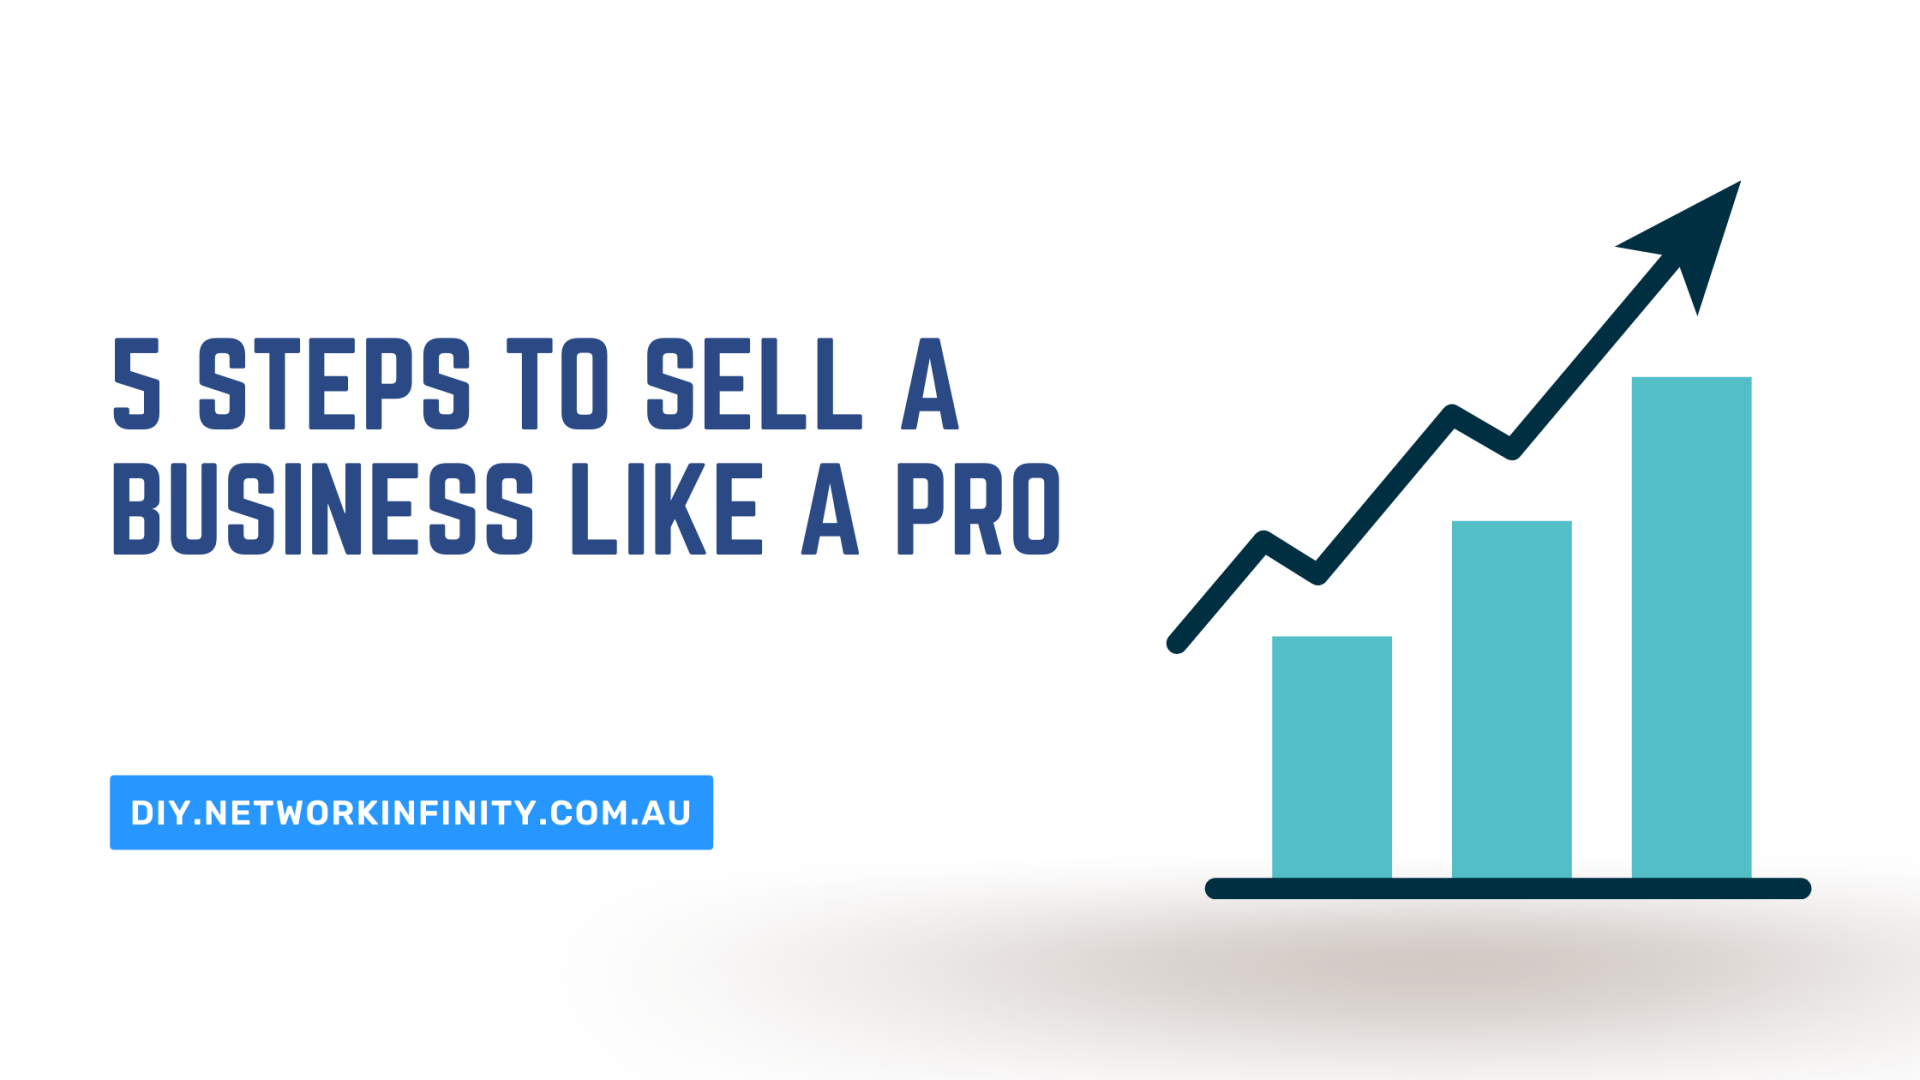 5 Steps To Sell A Business Like A Pro